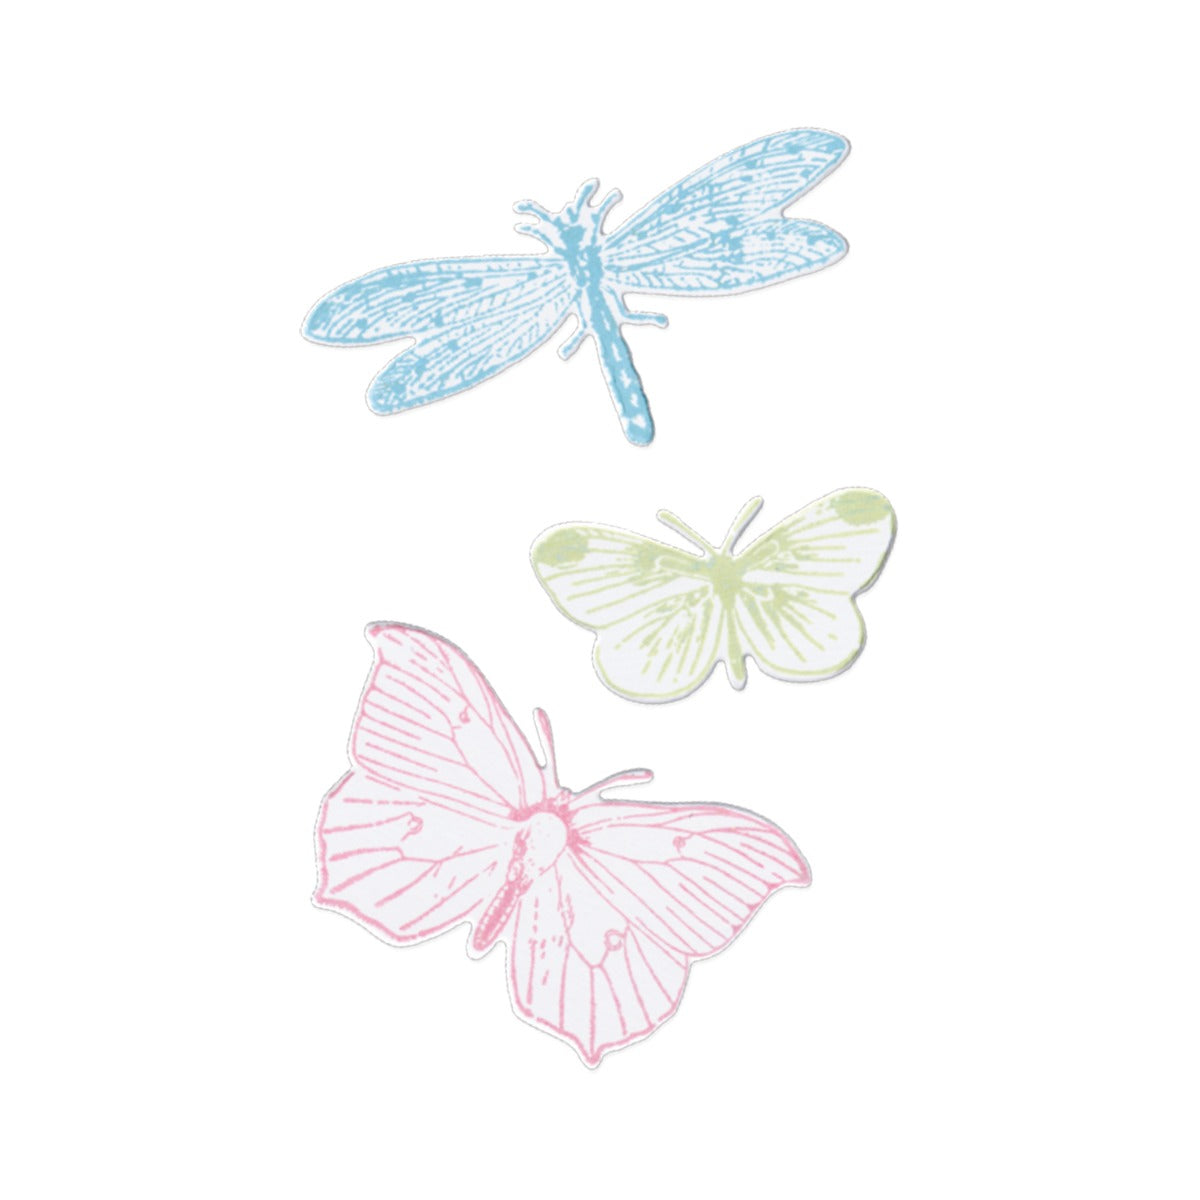 sizzix-framelits-die-set-3pk-w-3pk-stamps-engraved-wings-by-49-and-market